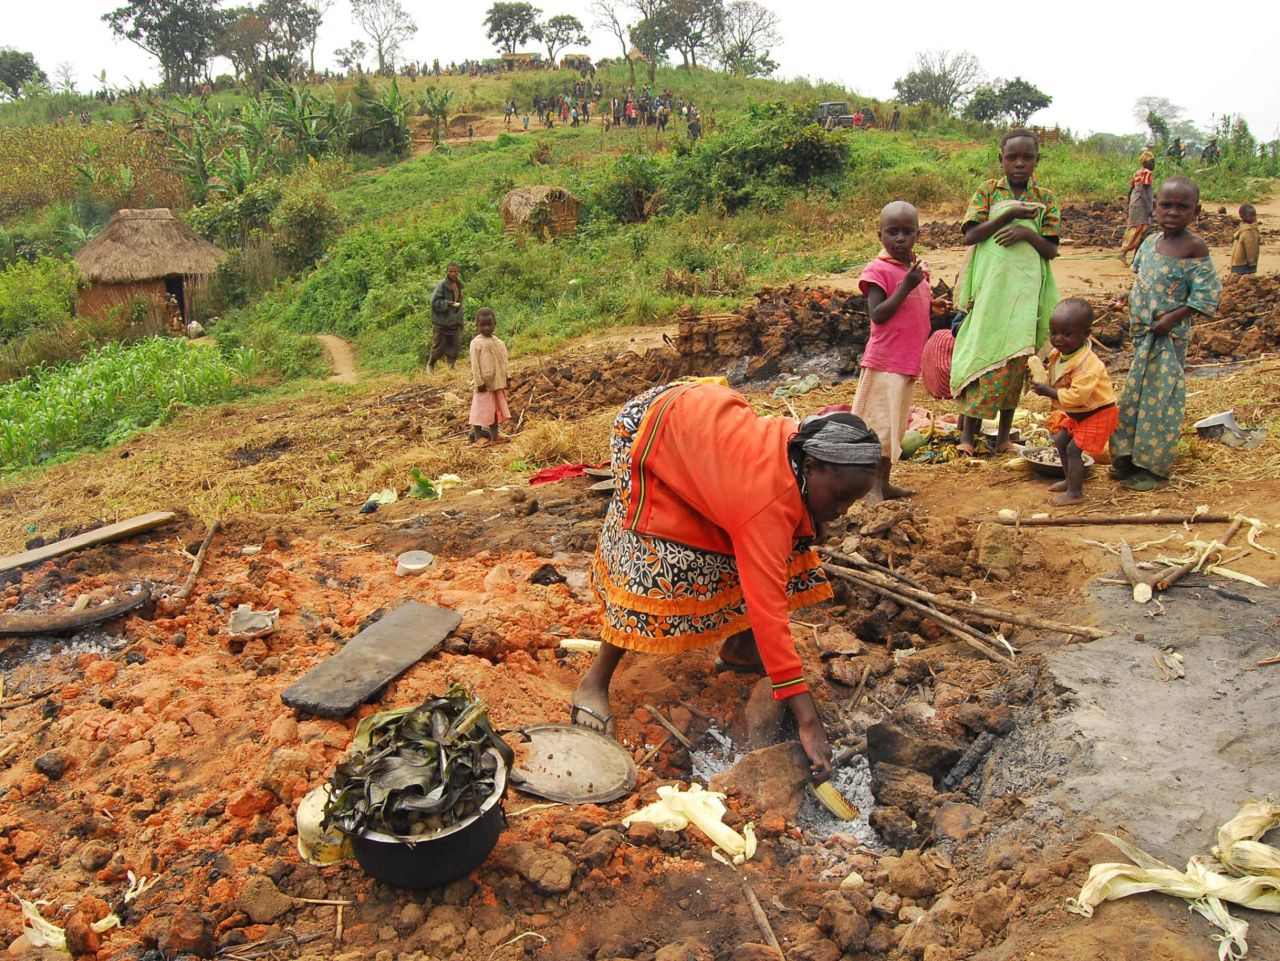 People displaced from their villages rummage through the ashes of their burnt homes in the North Kivu province in the Democratic Republic of the Congo (DRC) in February 2016. Around 20 people were killed and 40 wounded in one weekend's violence, the spokesperson for the U.N. High Commissioner for Human Rights, <a href="http://www.ohchr.org/EN/NewsEvents/Pages/DisplayNews.aspx?NewsID=17022&LangID=E" target="_blank" target="_blank">Cecile Pouilly, said in a statement</a>.